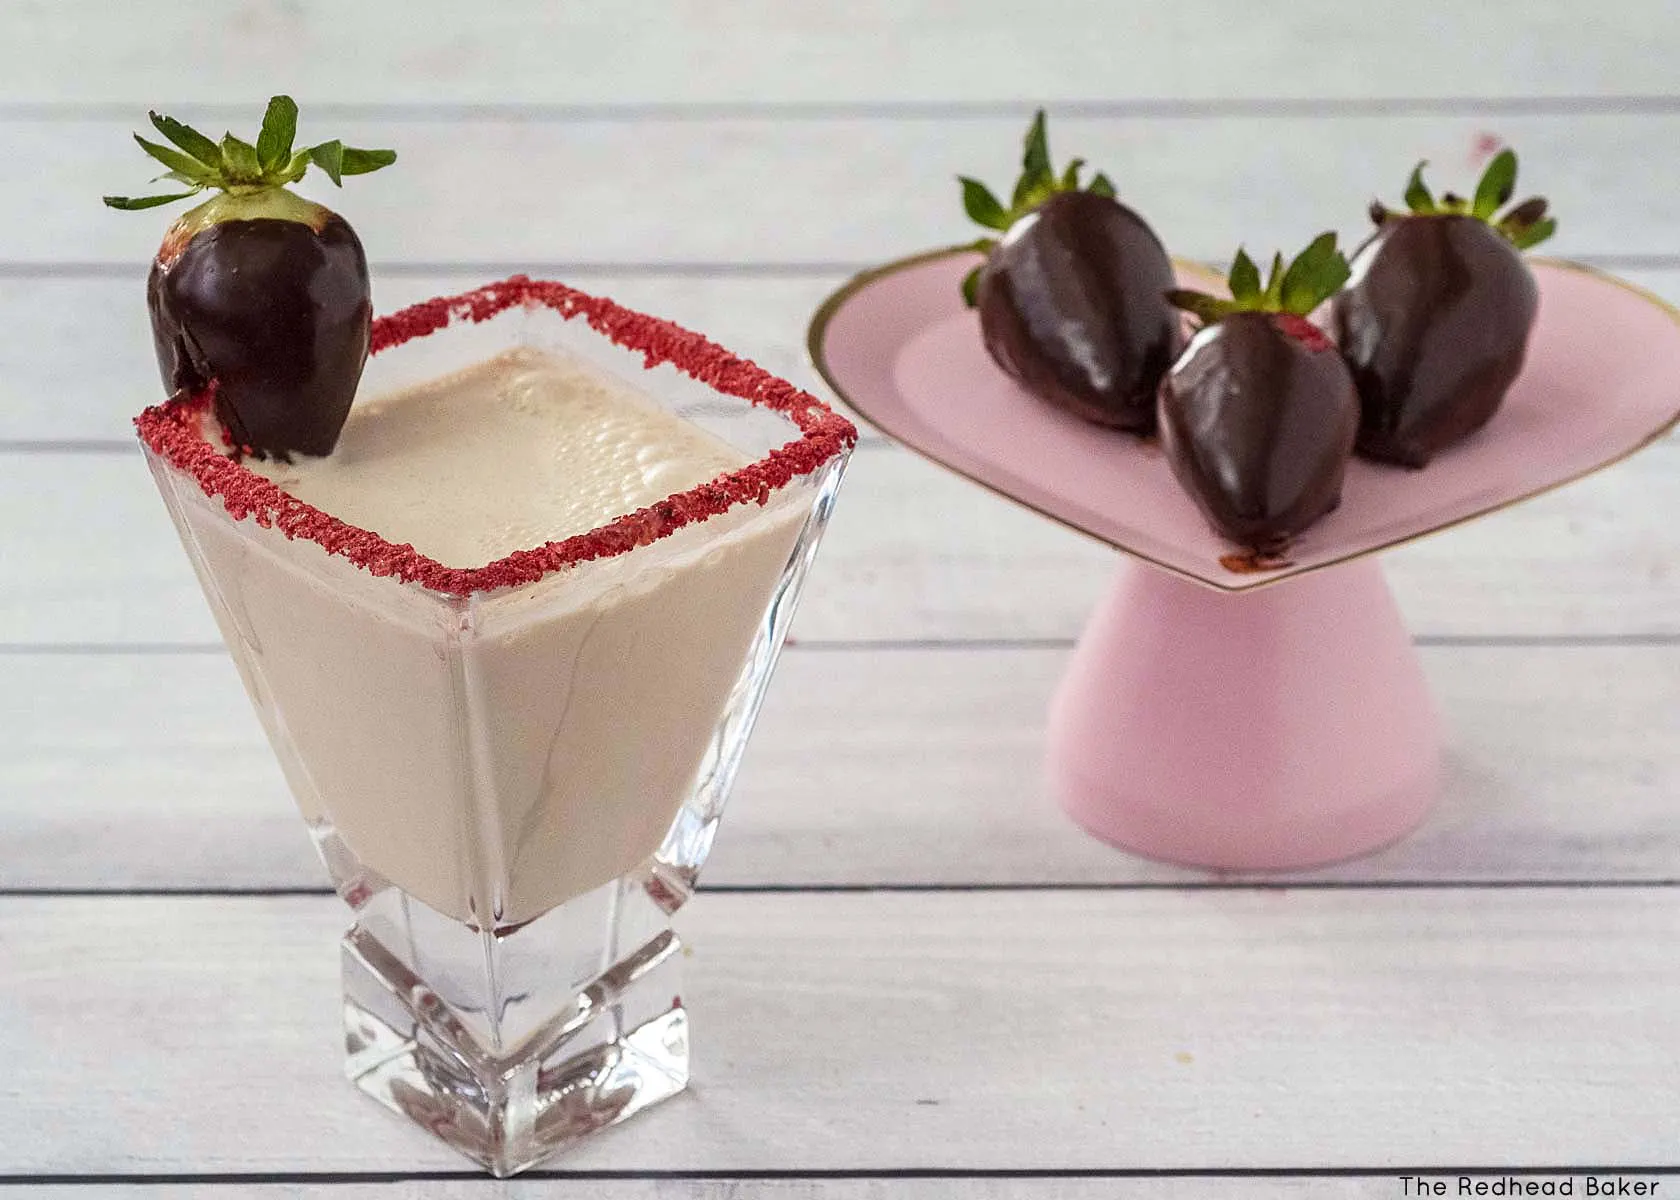 A chocolate strawberry martini next to a tray of chocolate-covered strawberries.